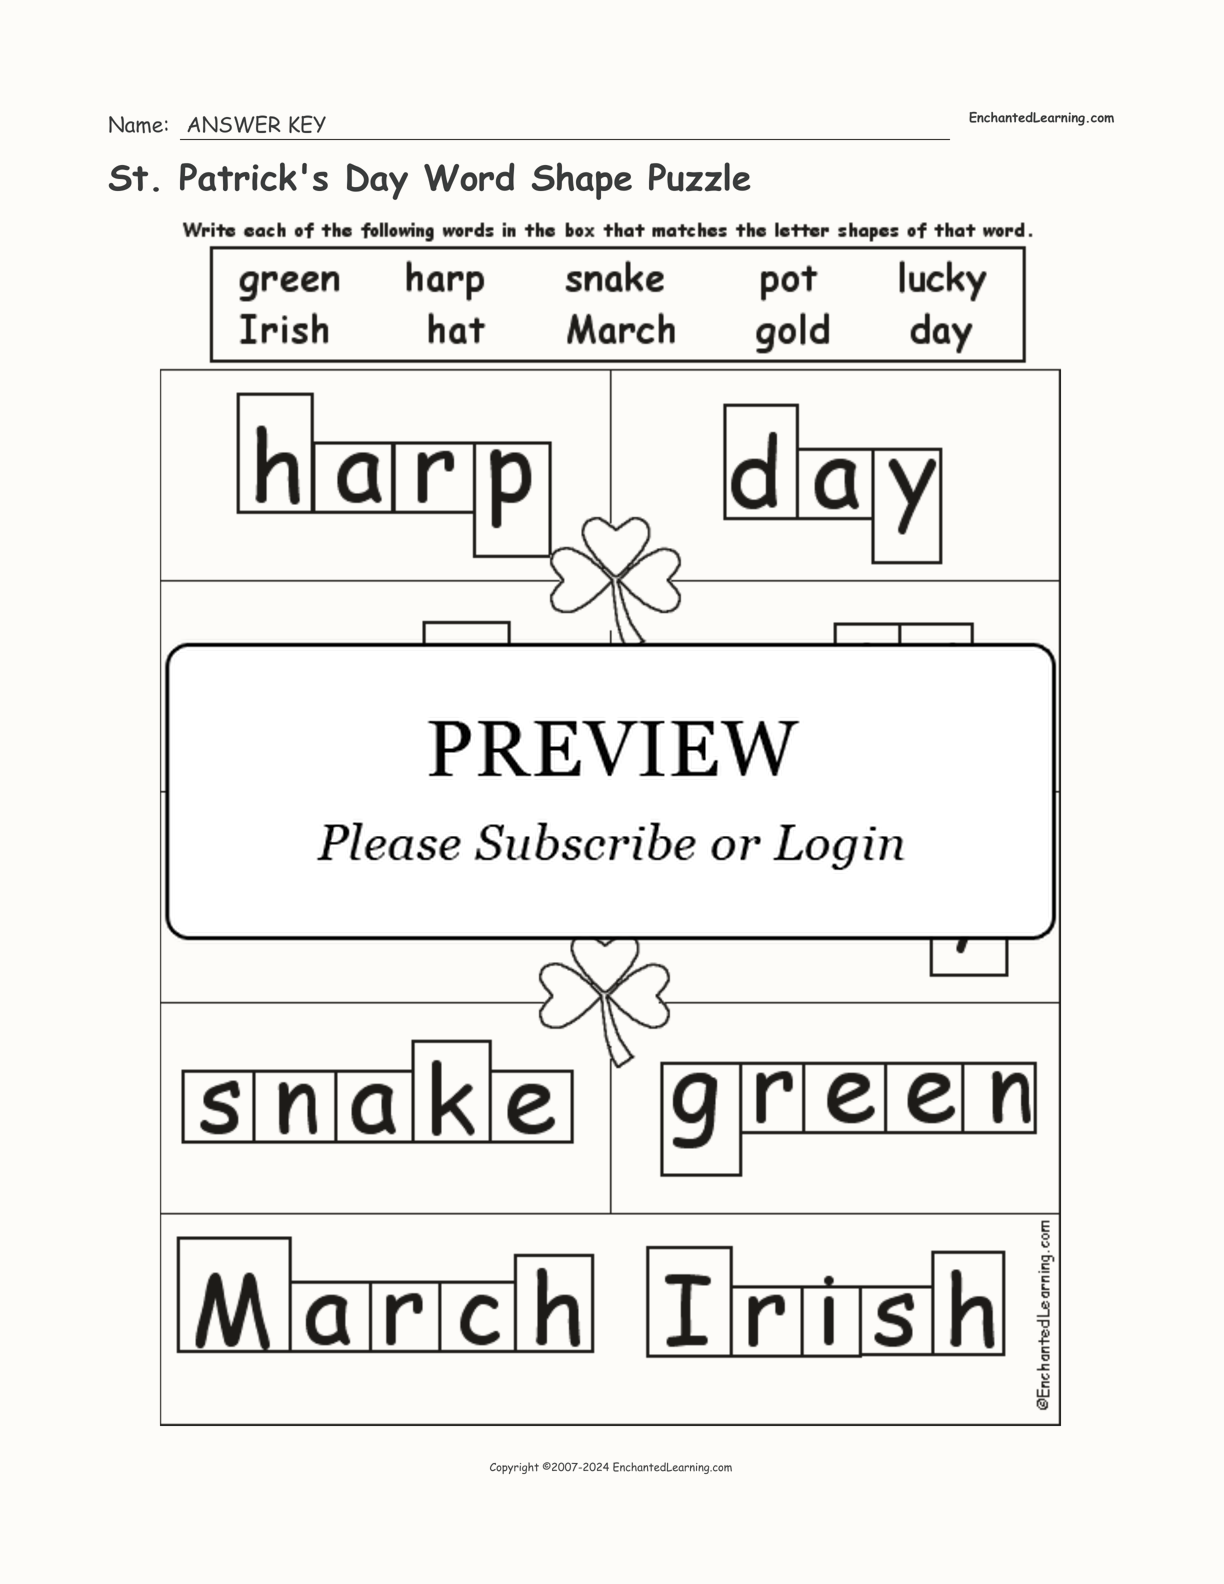 St. Patrick's Day Word Shape Puzzle interactive worksheet page 2